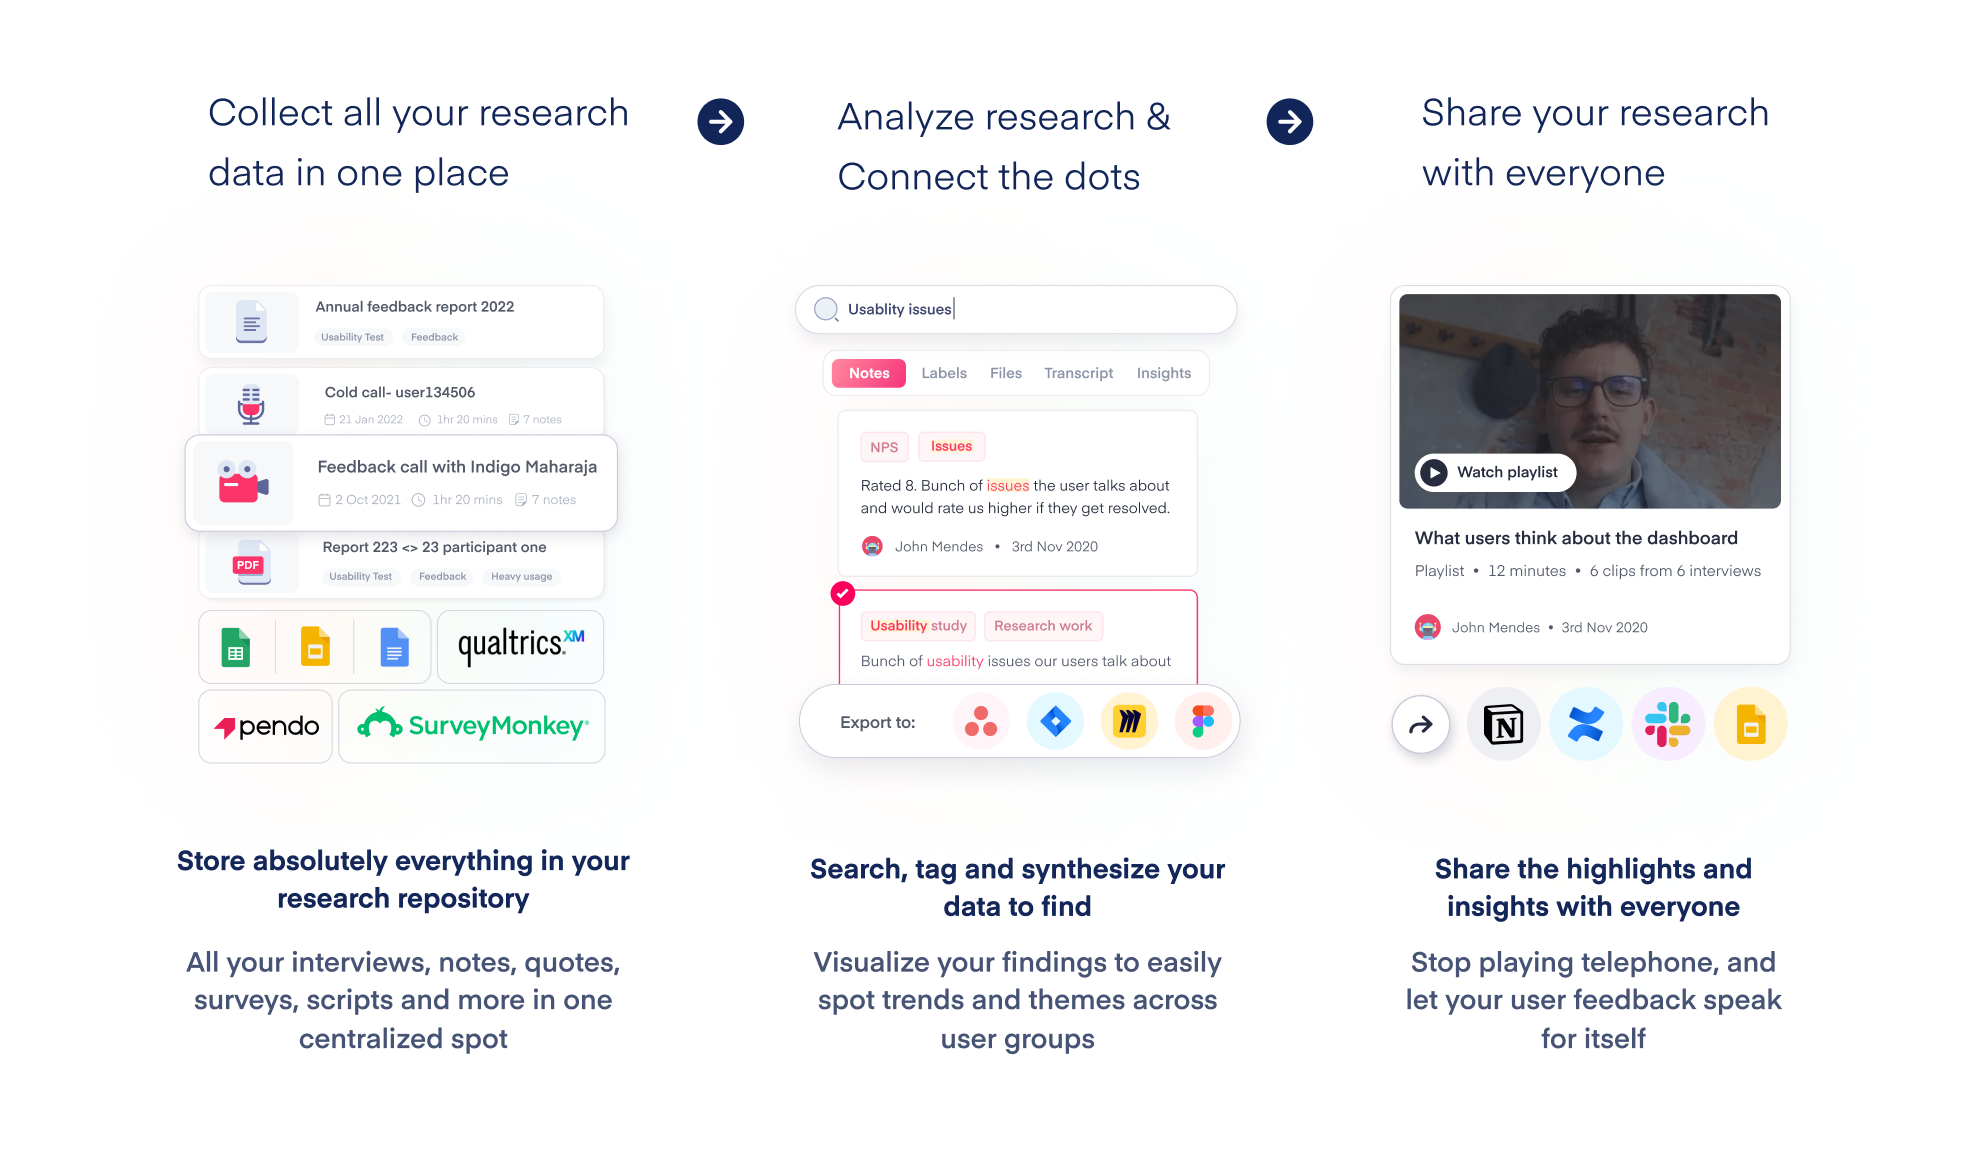 A research repository and qualitative data analysis platform, combined to streamline your research and make it easier than ever to share important insights and build better products.